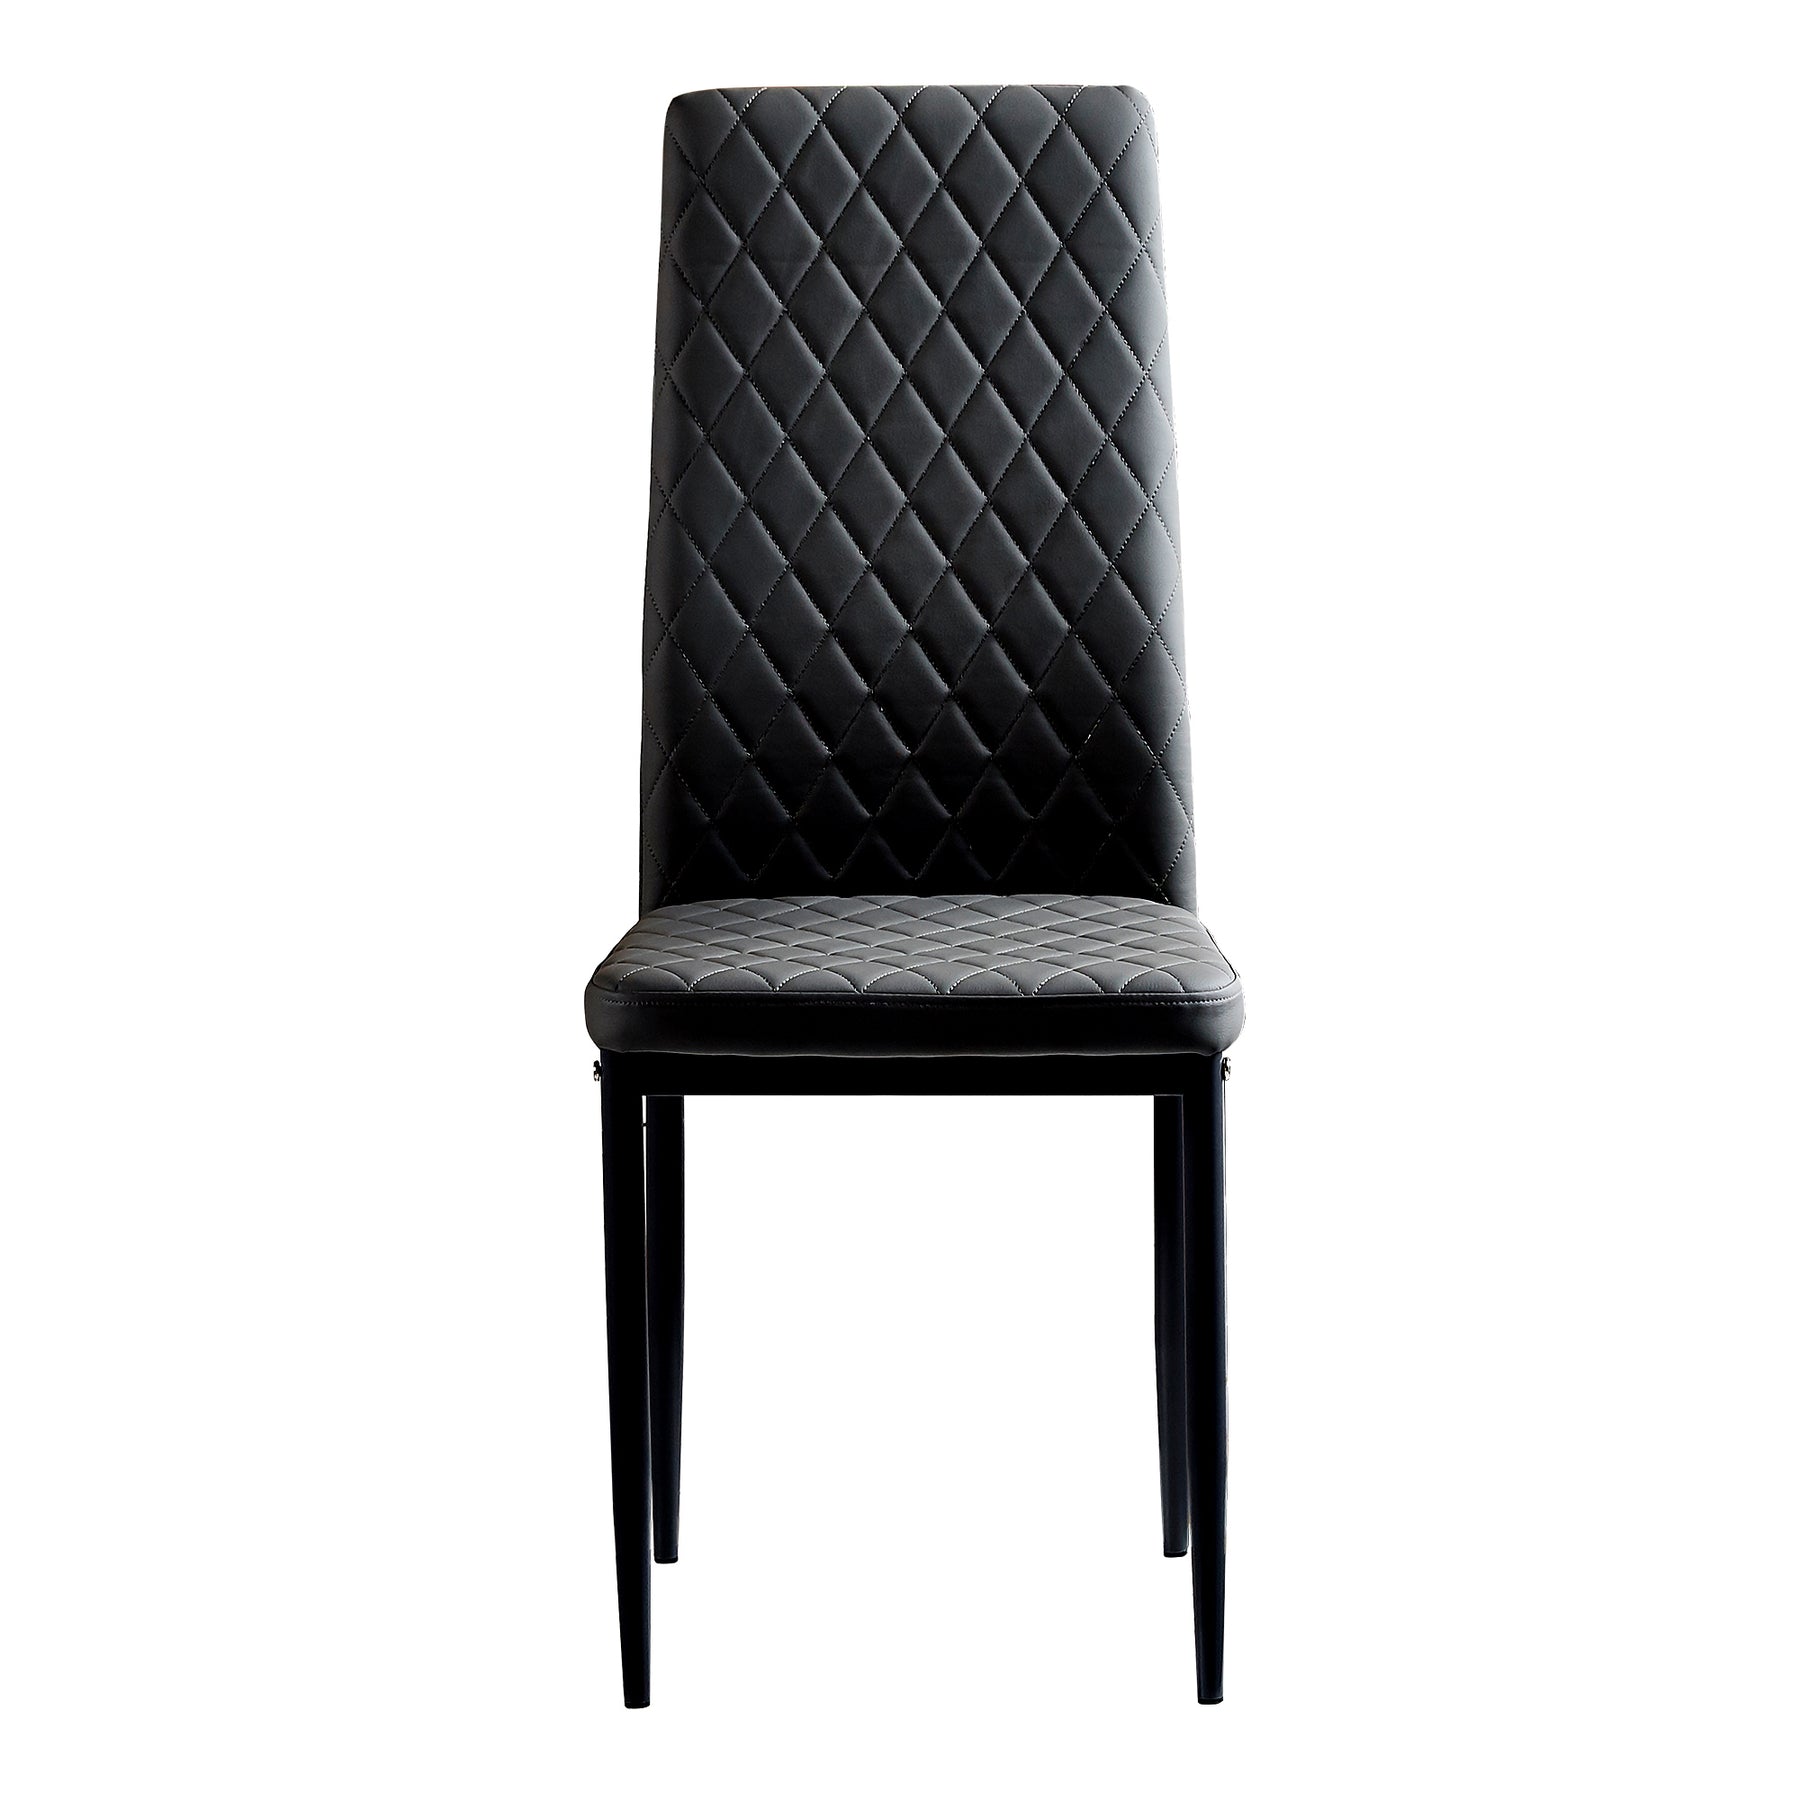 Black modern minimalist dining chair fireproof leather sprayed metal pipe diamond grid pattern restaurant home conference chair set of 4 - Tonkn